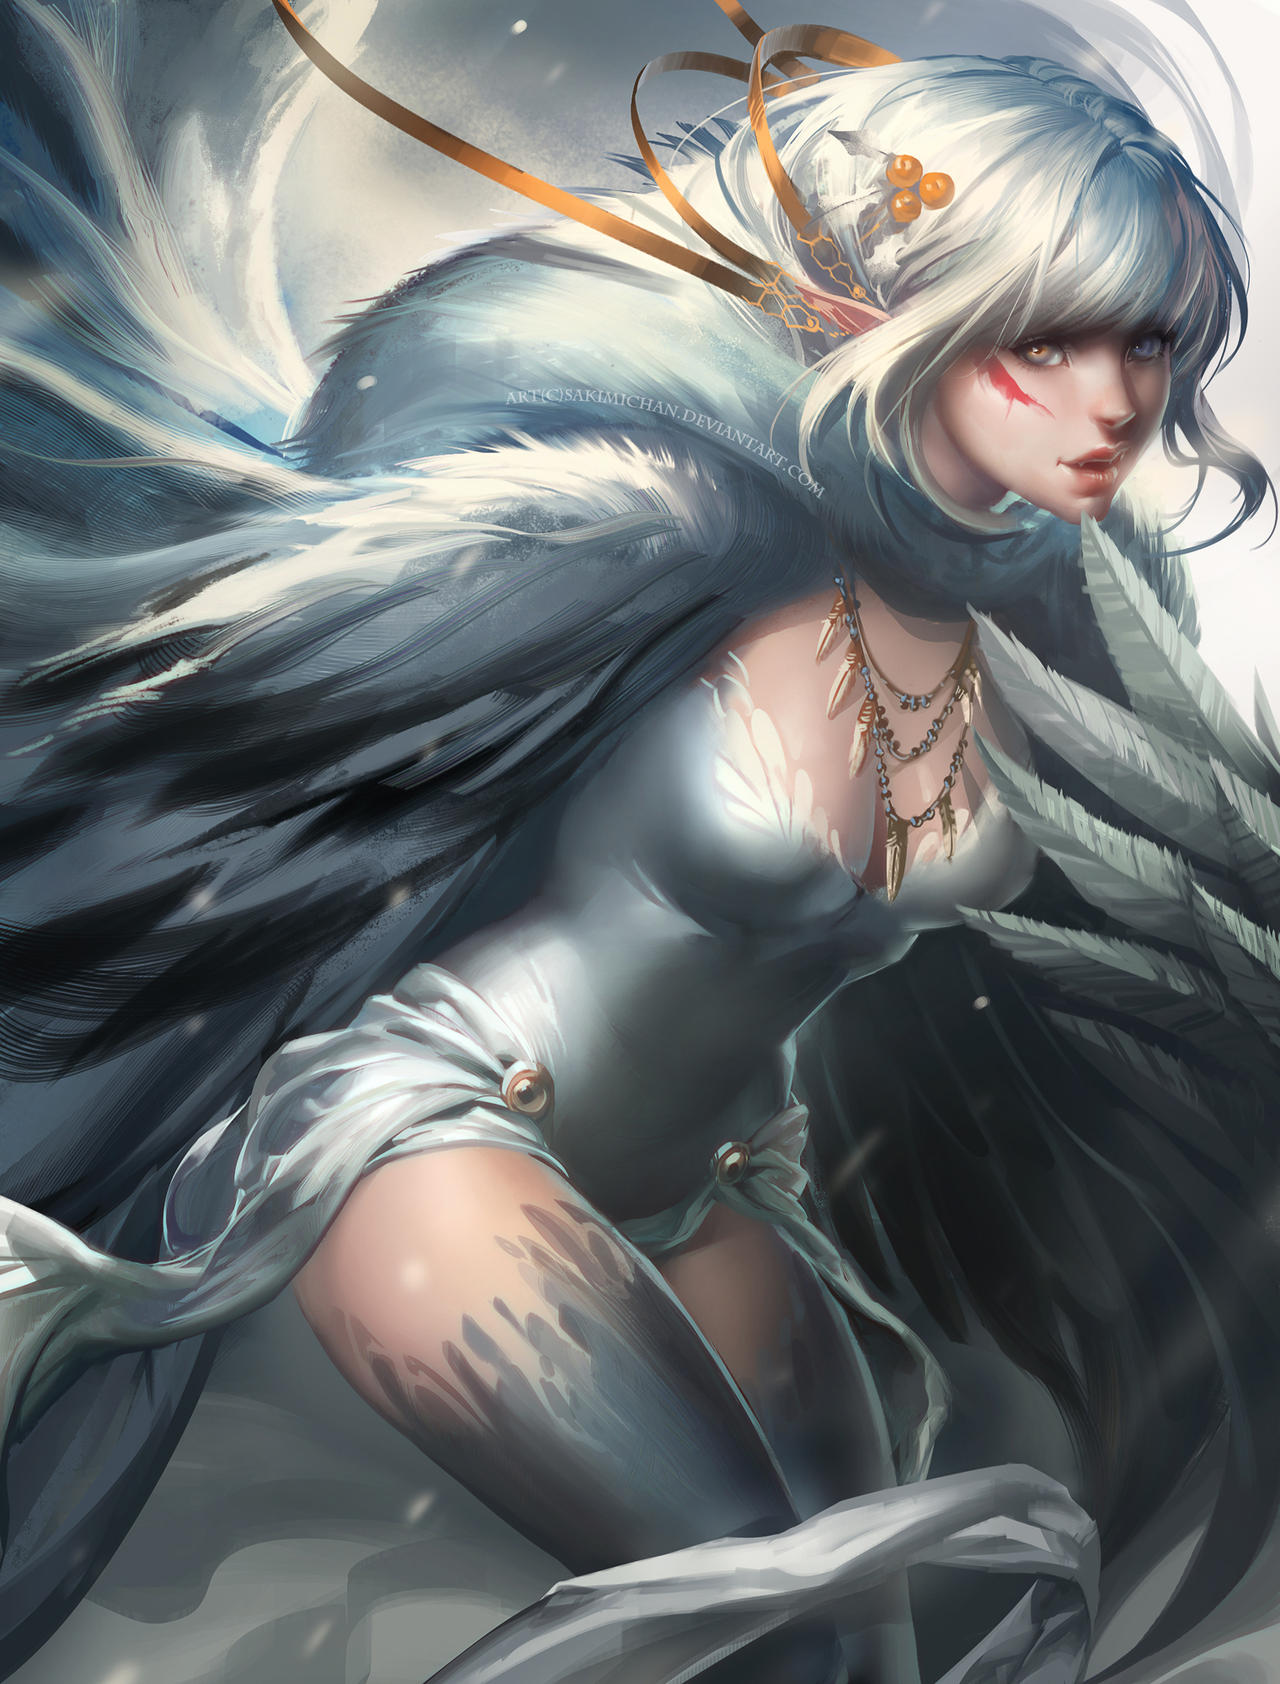 playful_snow_harpy_by_sakimichan_d5odkw1-fullview.jpg